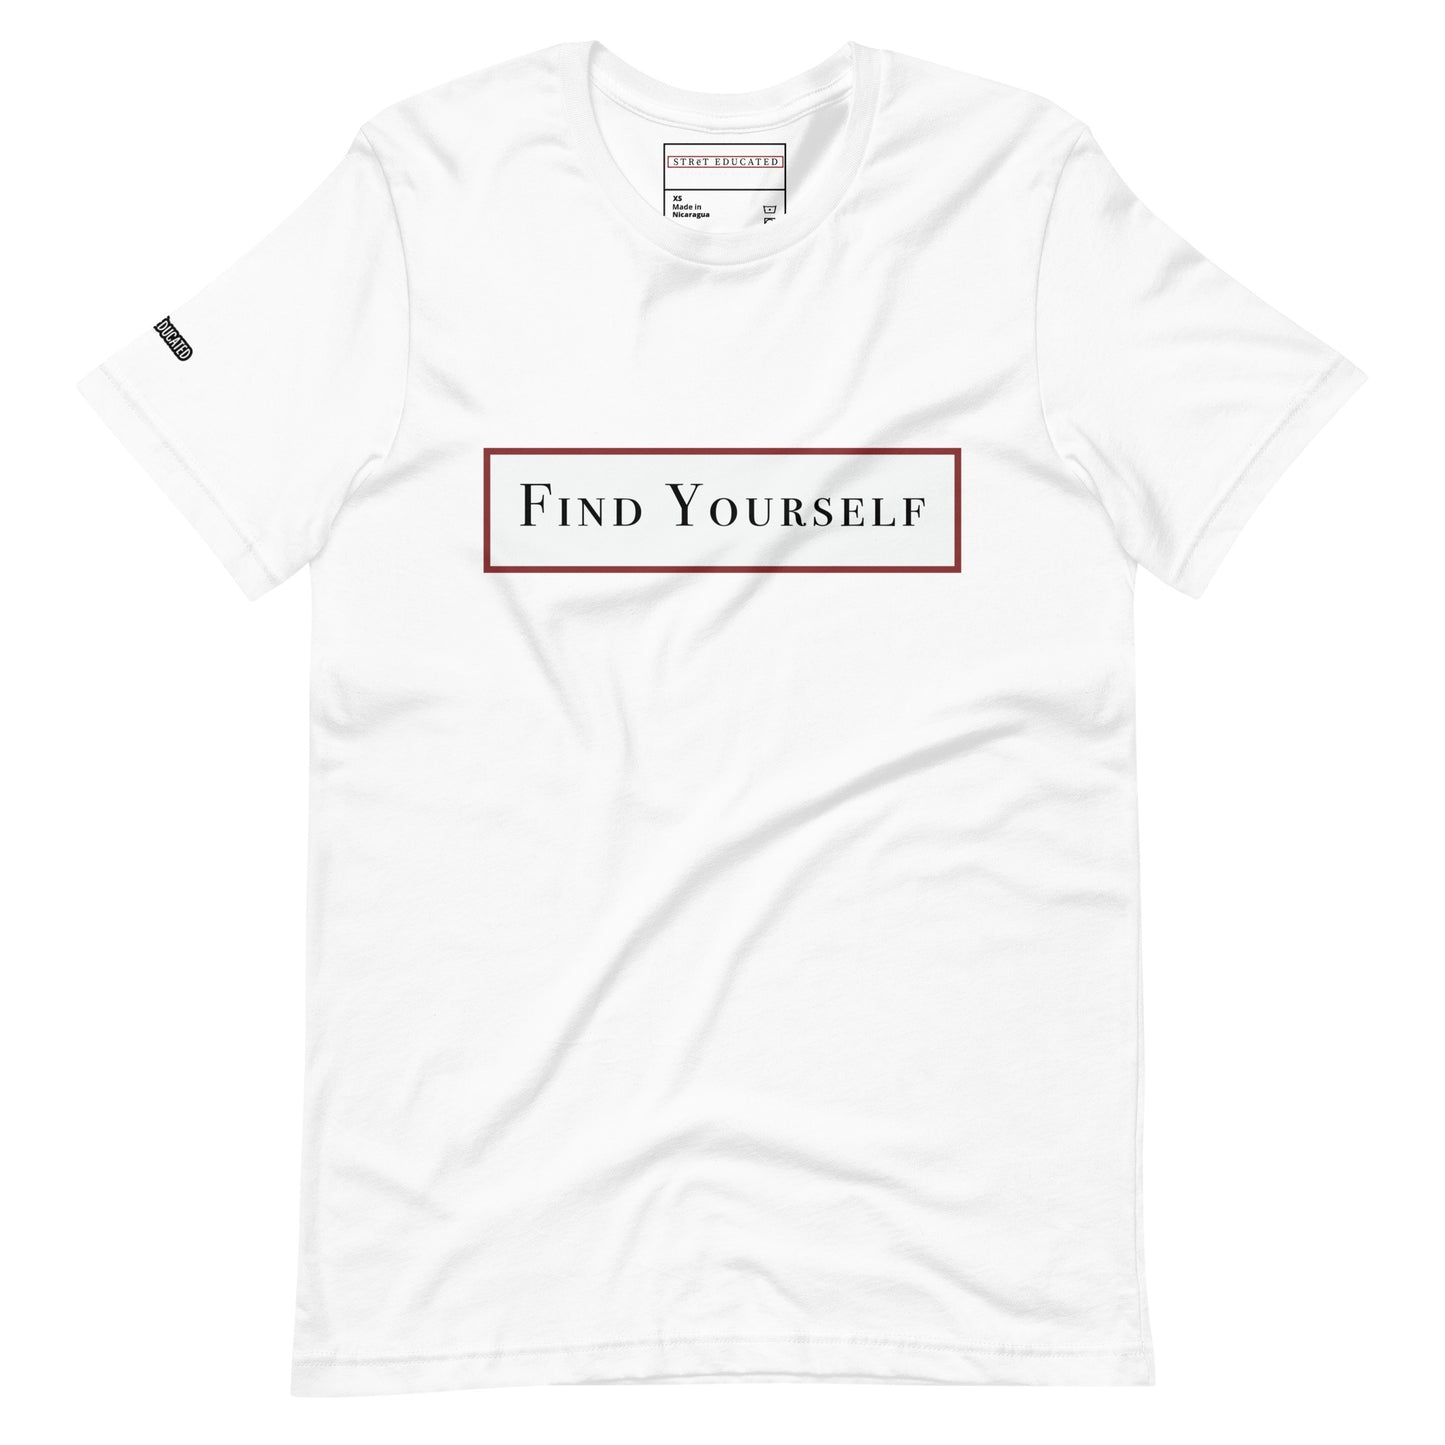 Find Yourself T-shirt